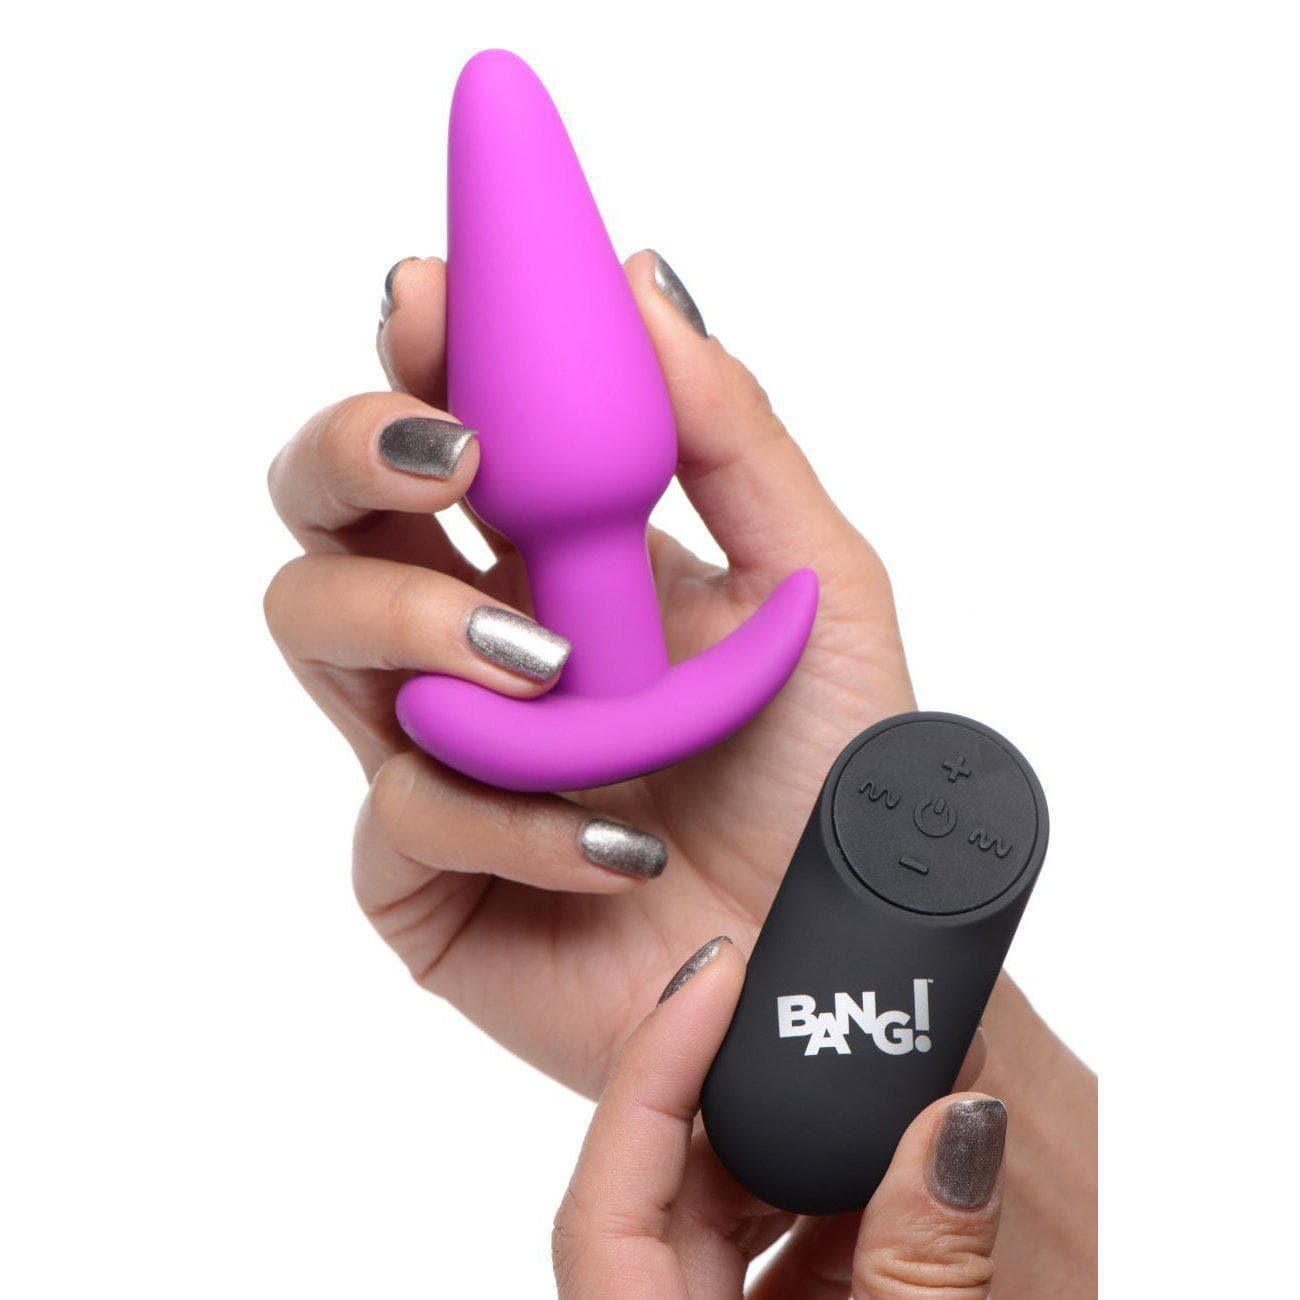 Bang! 21 Function Vibrating Silicone Rechargeable Butt Plug With Remote Control - Romantic Blessings